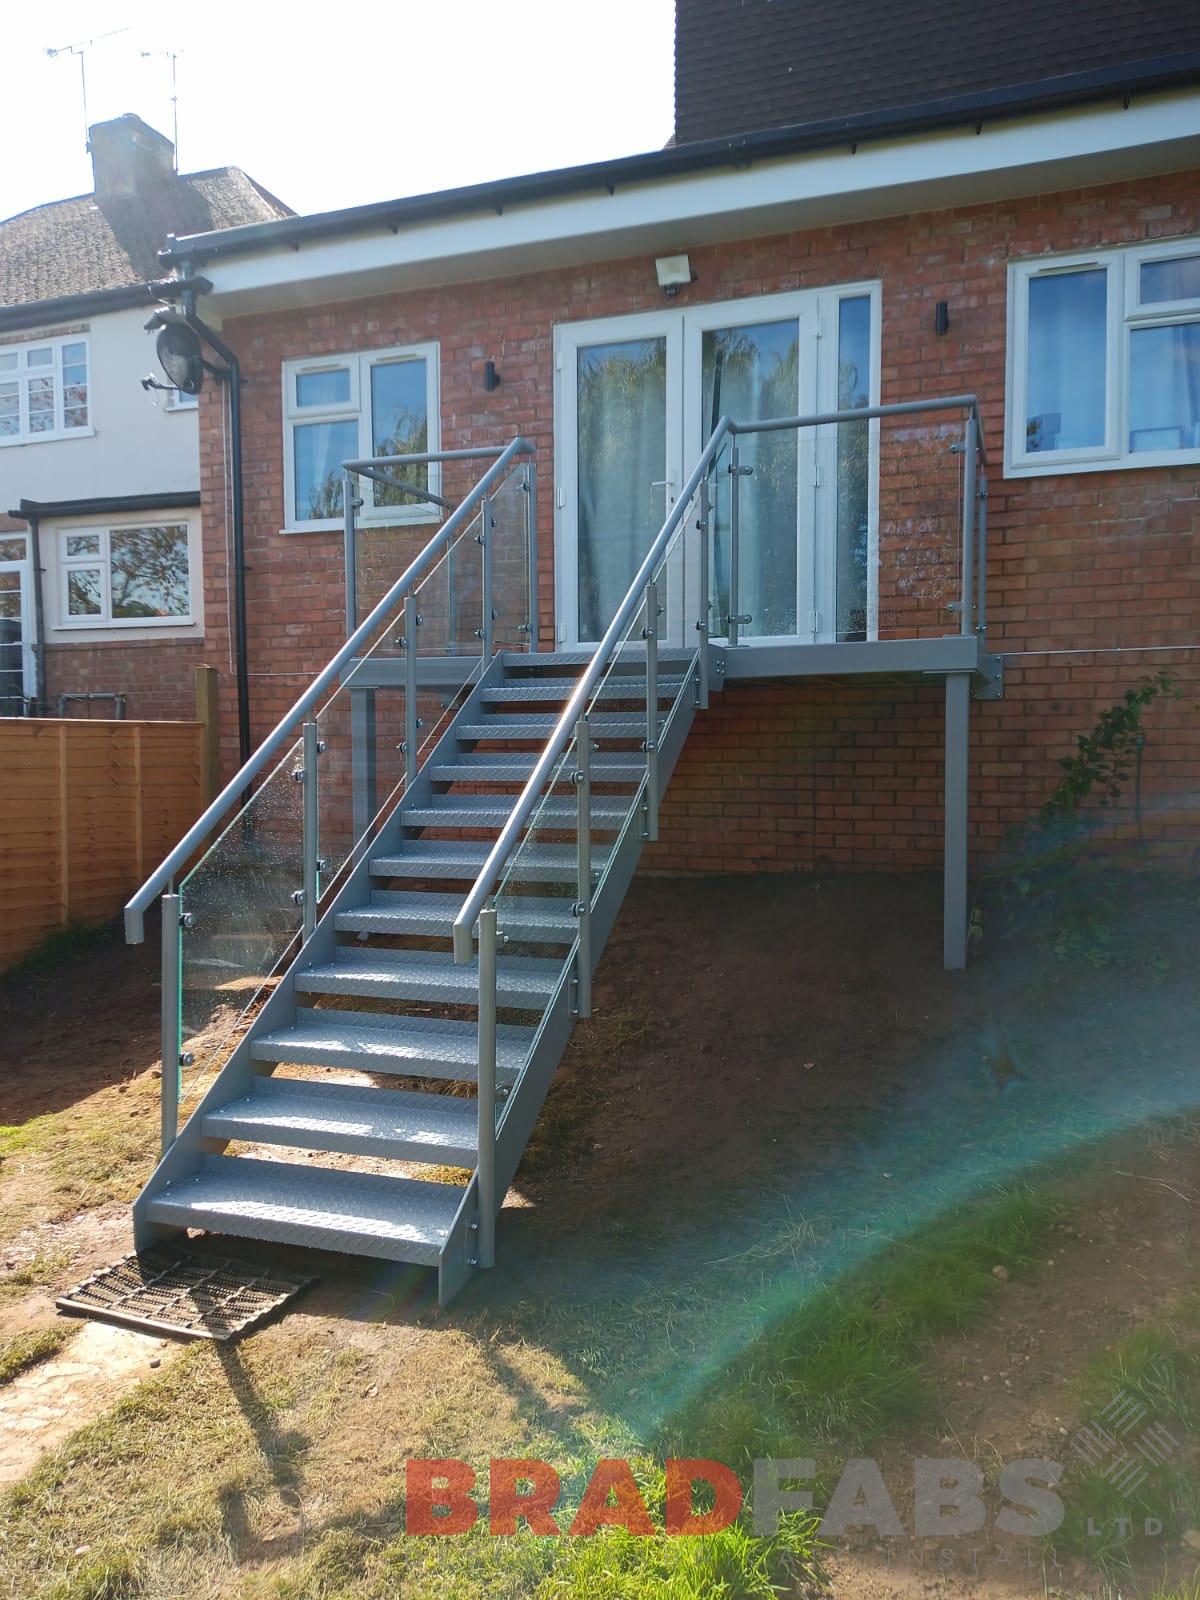 Bradfabs, staircase, external staircase, bespoke staircase, balcony and staircase, durbar treads, mild steel, galvanised steel, glass balustrade 